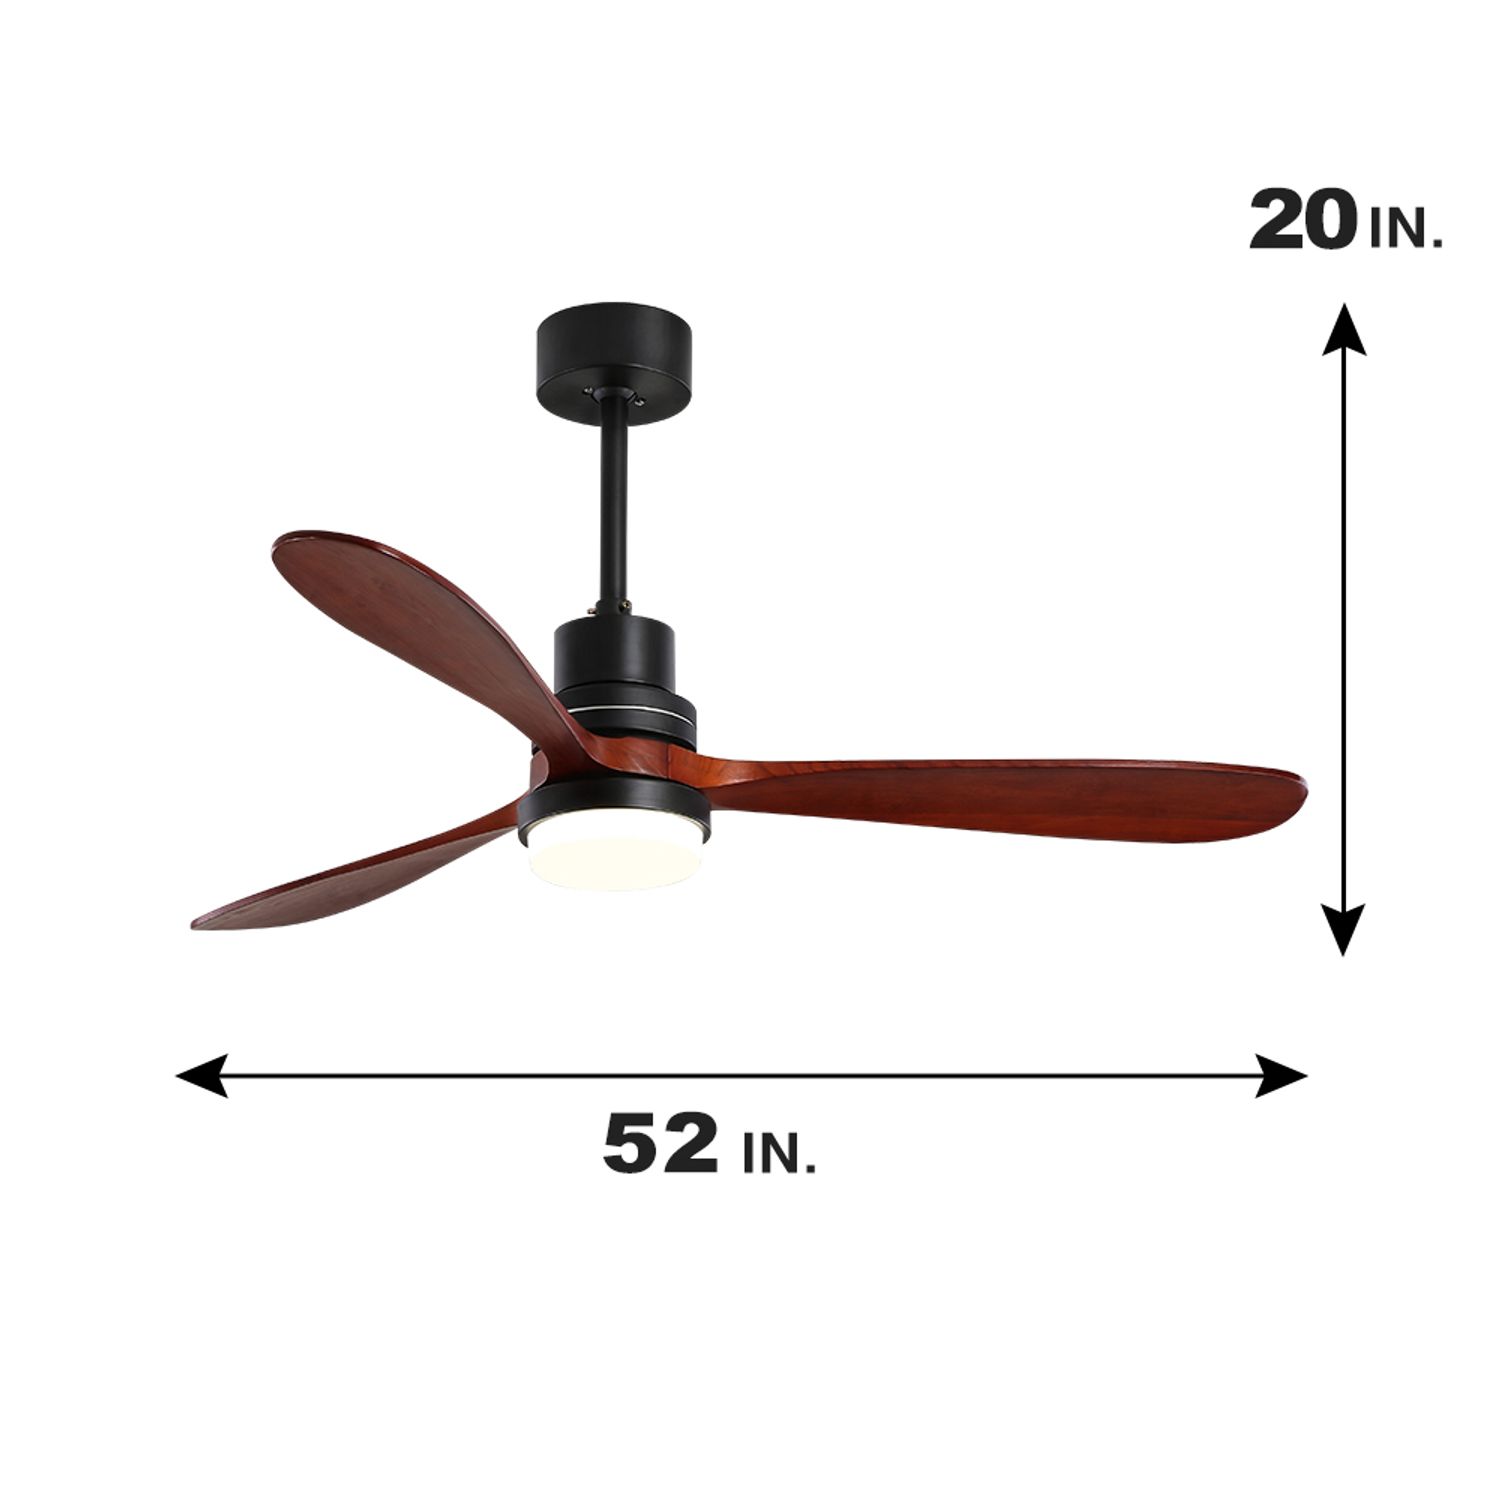 Wooden Propeller Ceiling Fan with LED Lighting 52 inch size